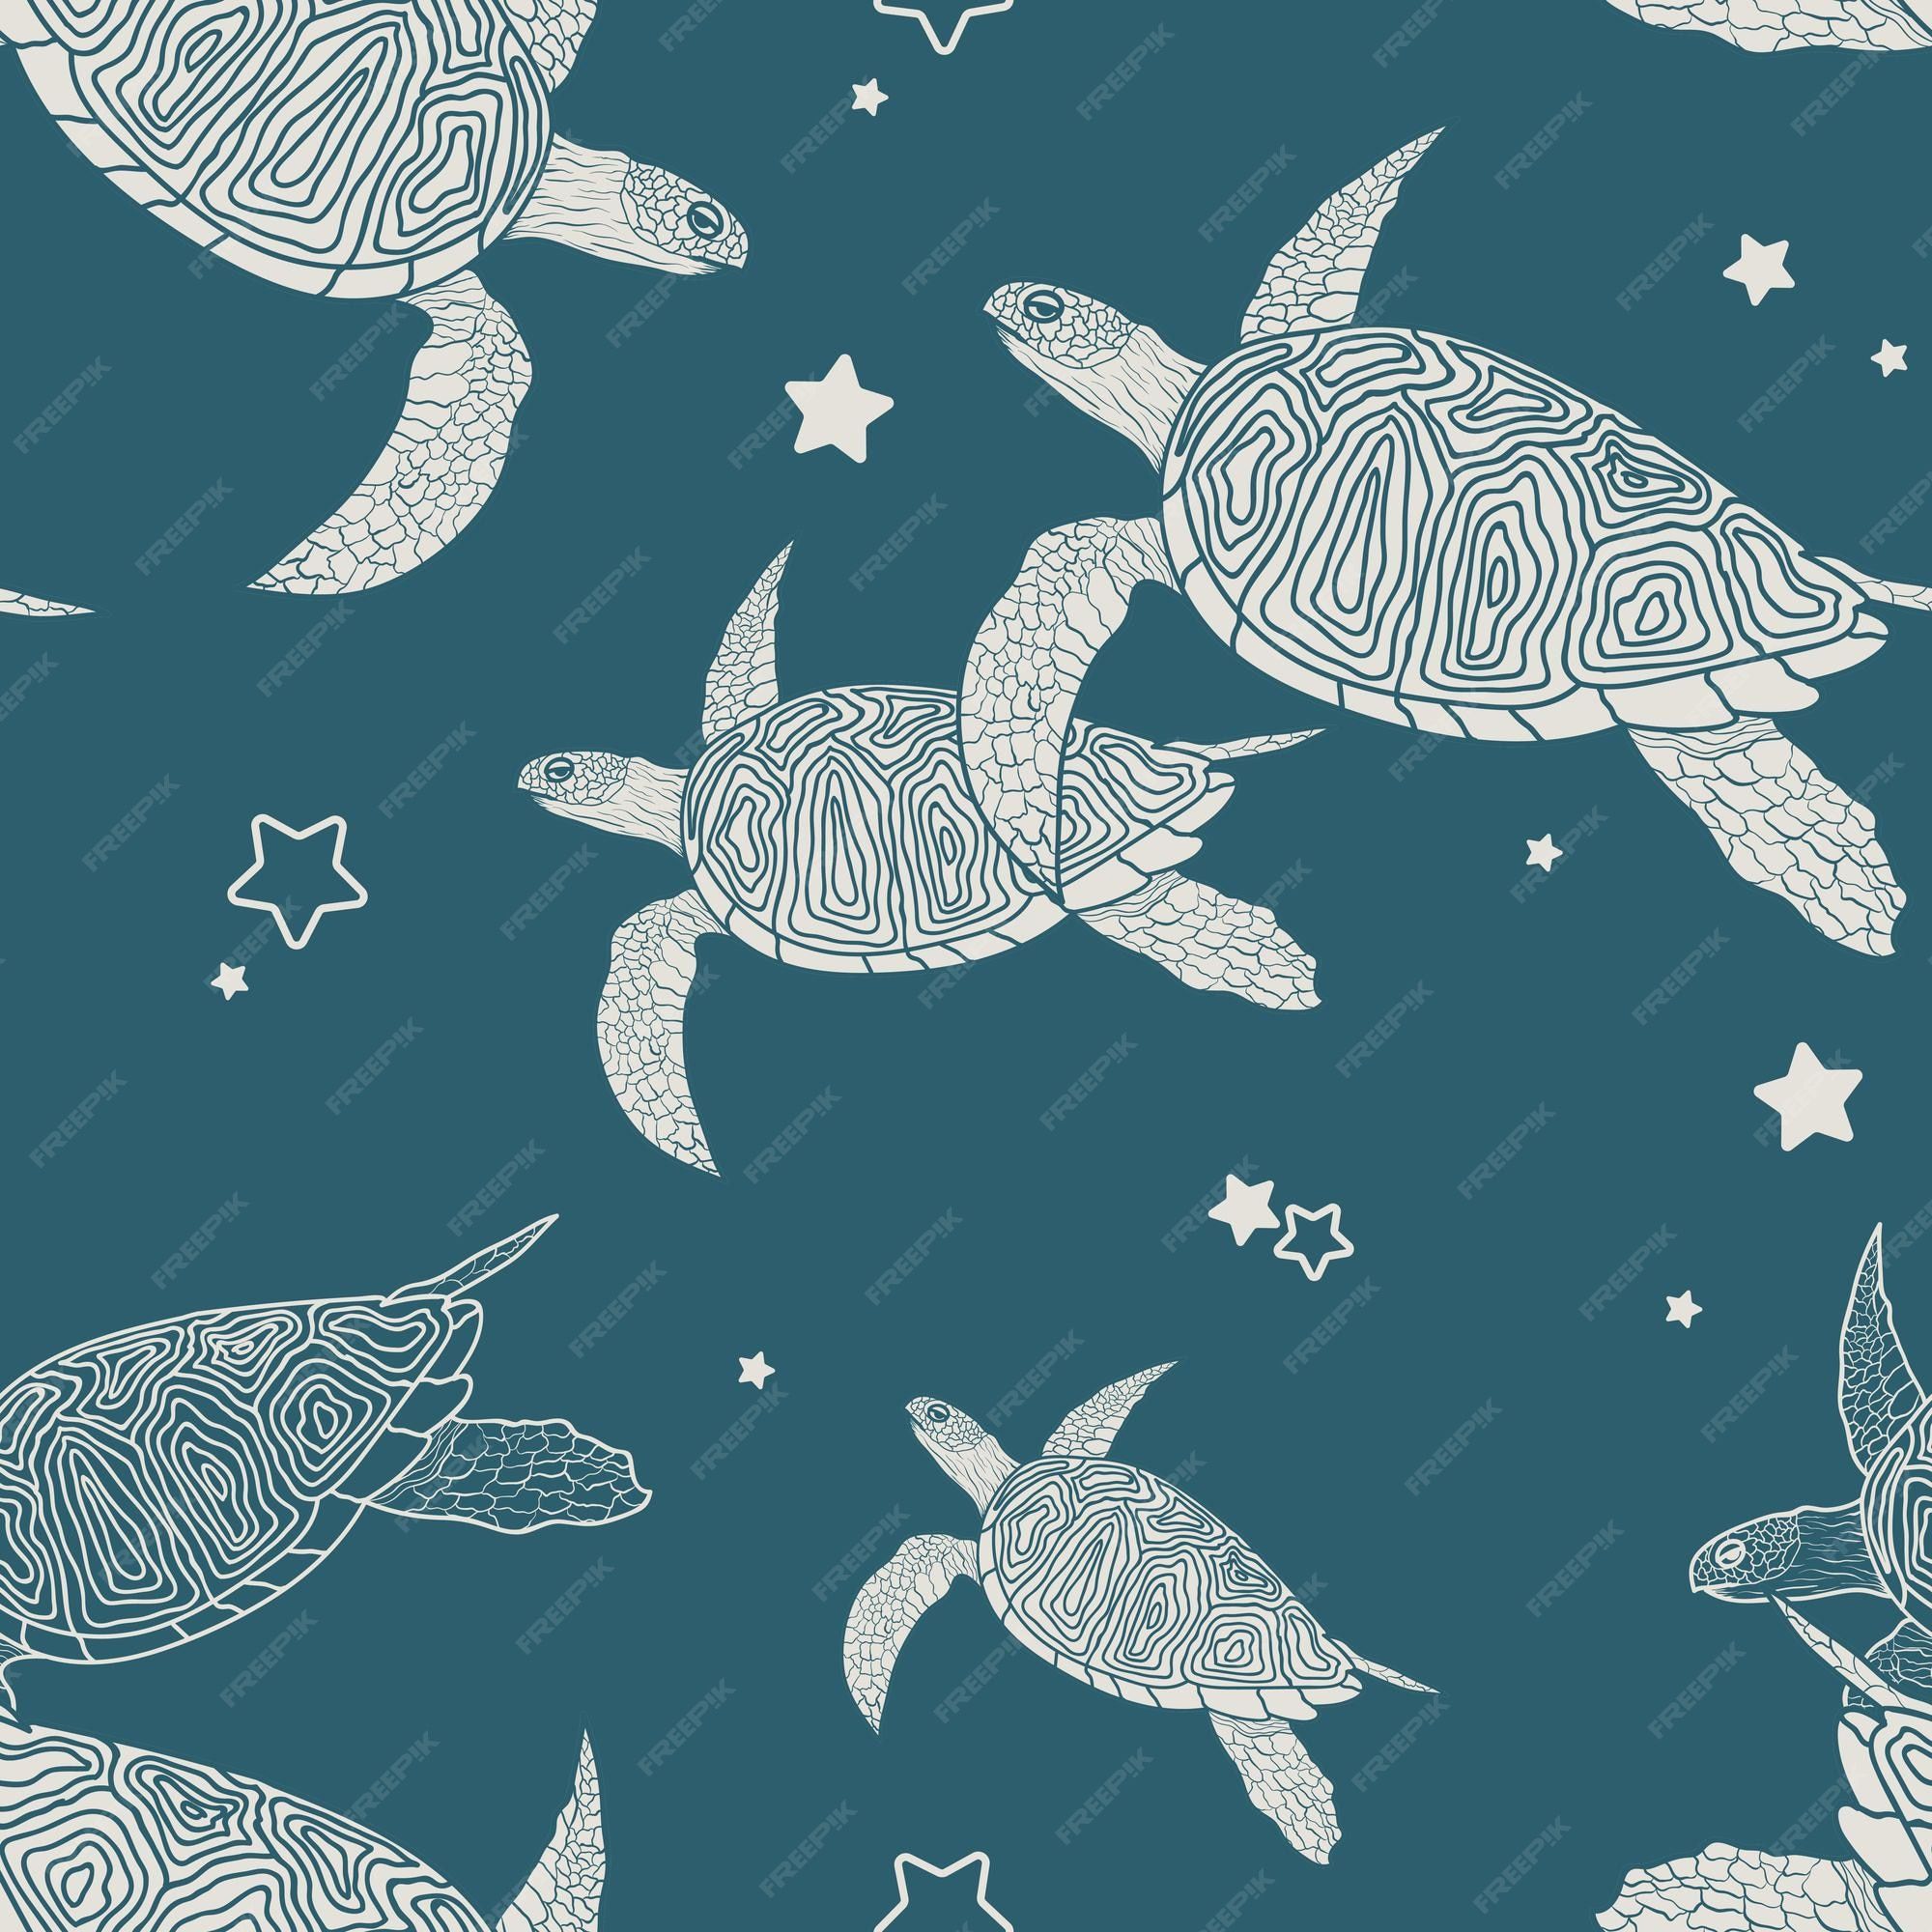 Premium Vector. Seamless pattern with sea turtles.suitable for your wallpaper marine life